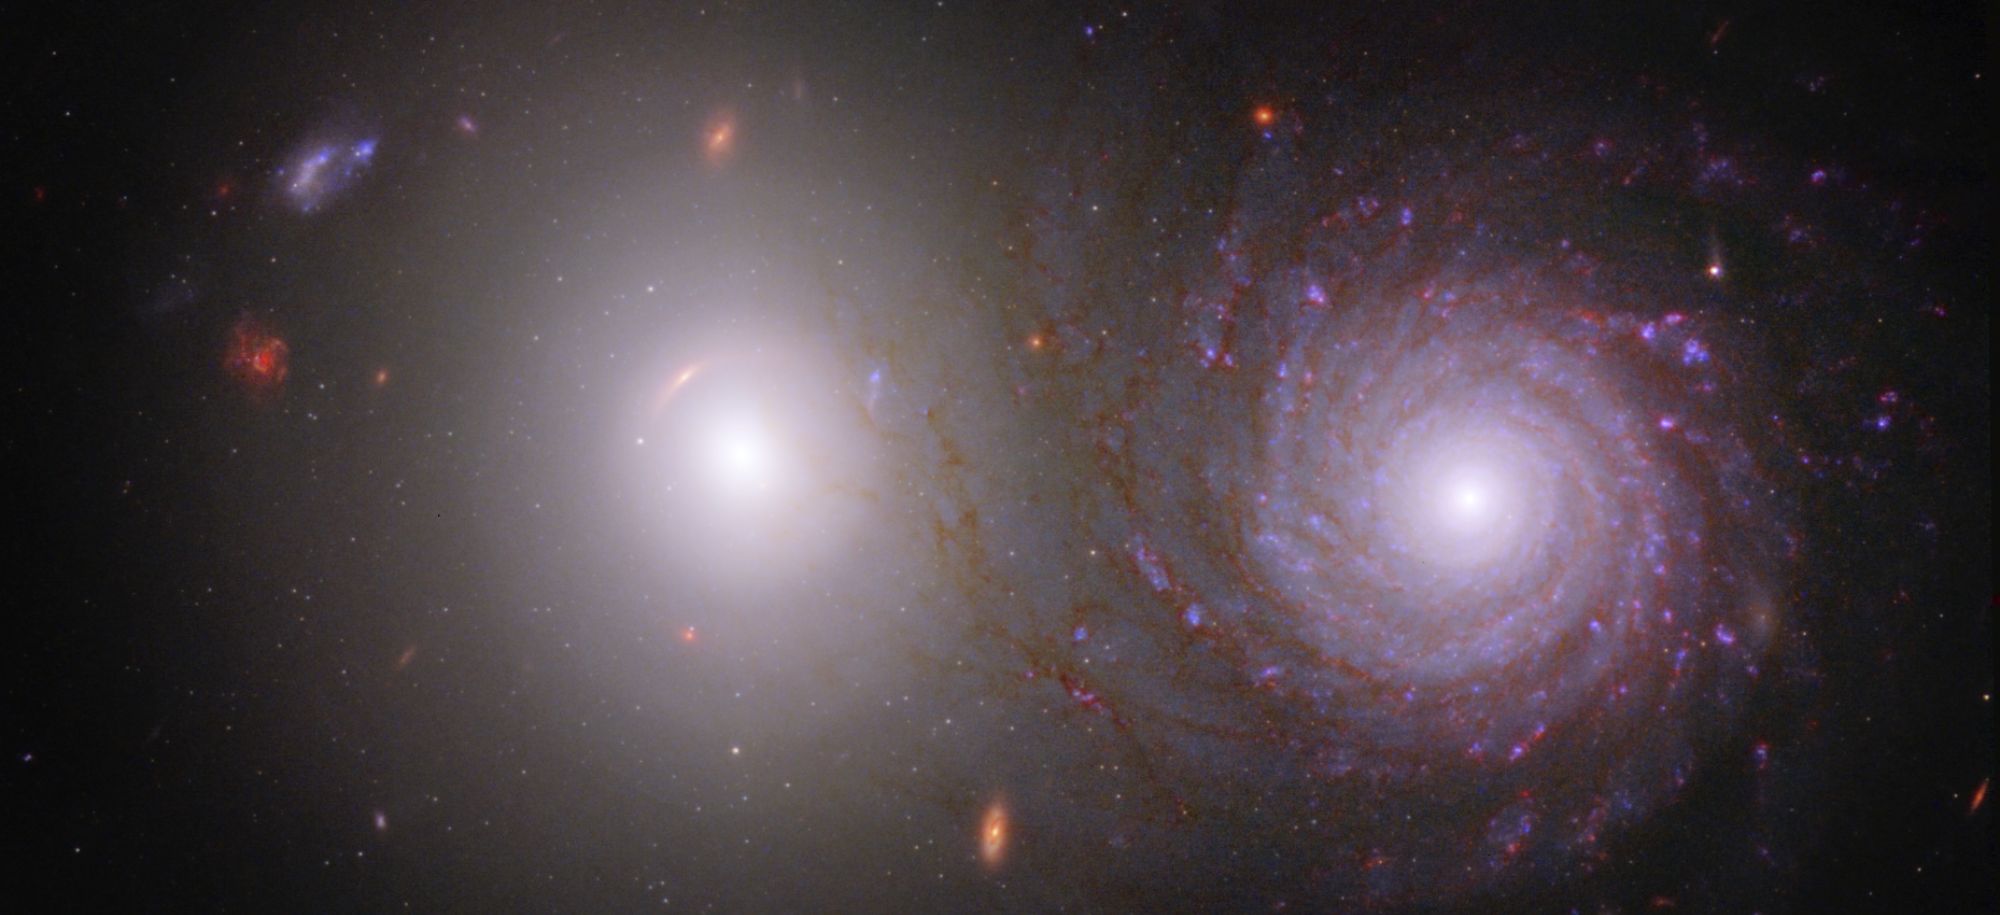 An elliptical and spiral galaxy sit side by side against a backdrop of space and stars